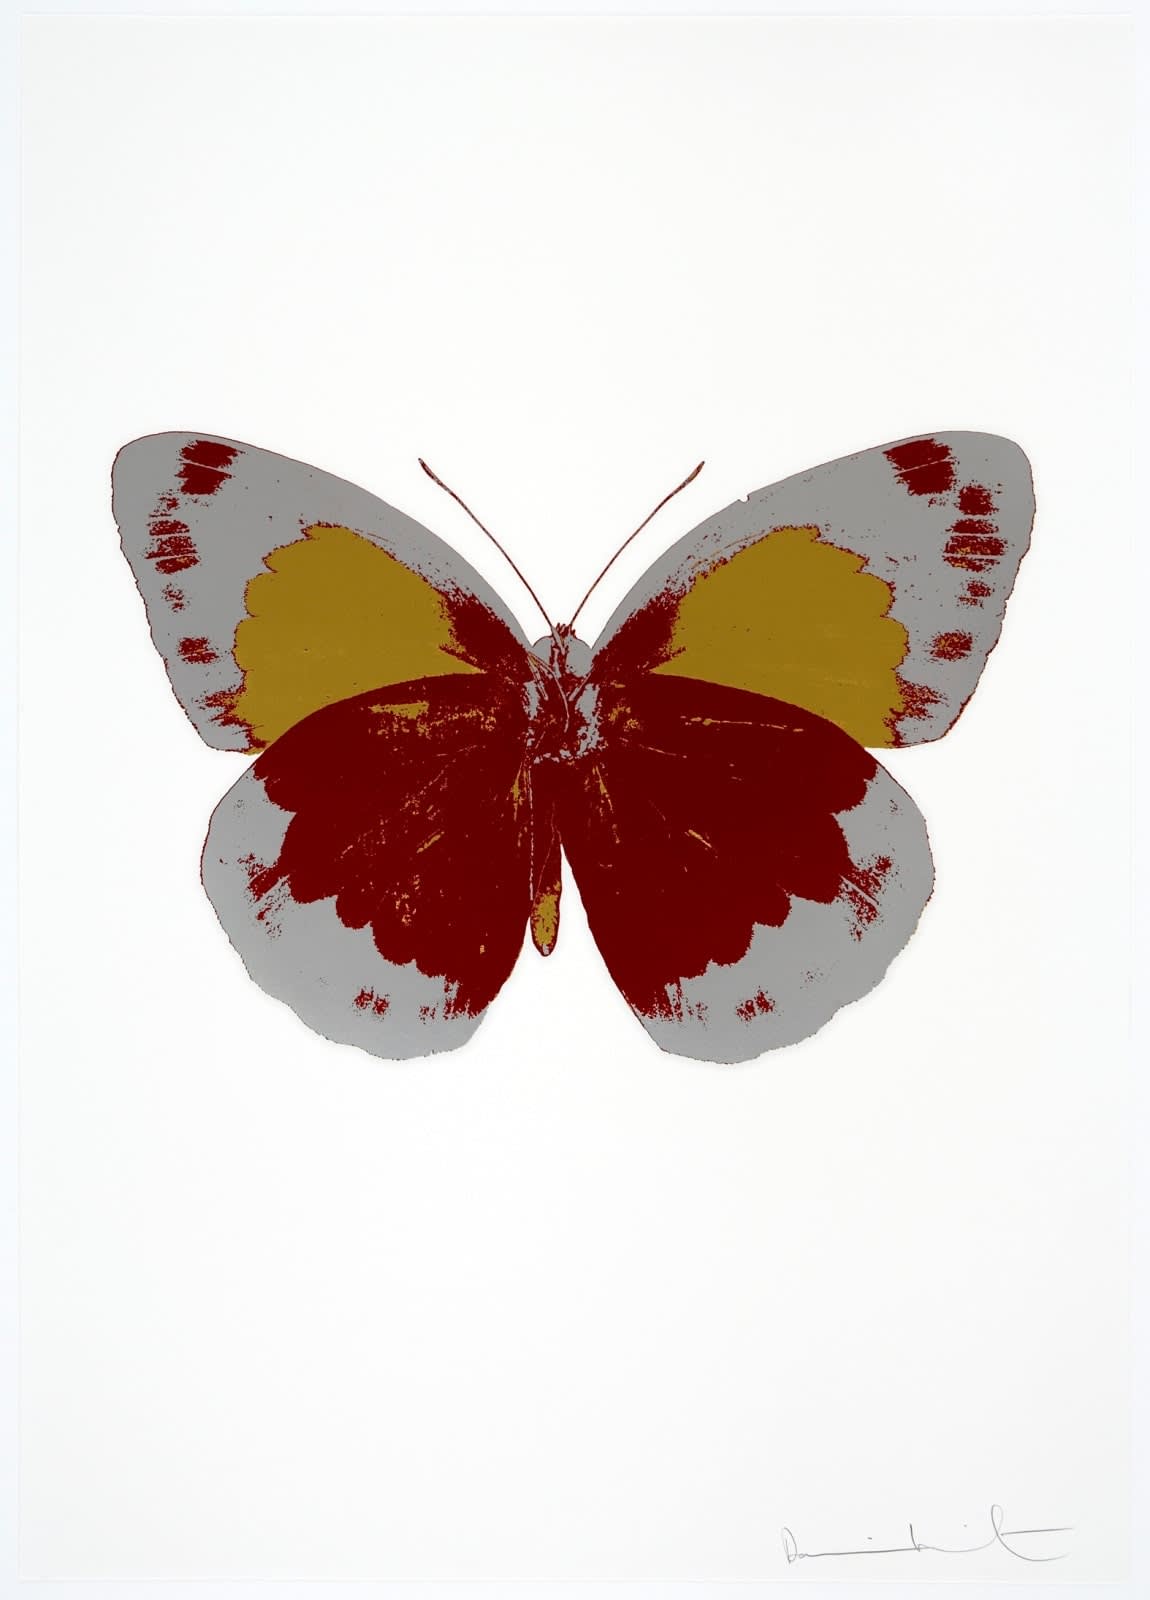 Damien Hirst, The Souls II – Chilli Red/ Silver Gloss. Oriental Gold, 2010